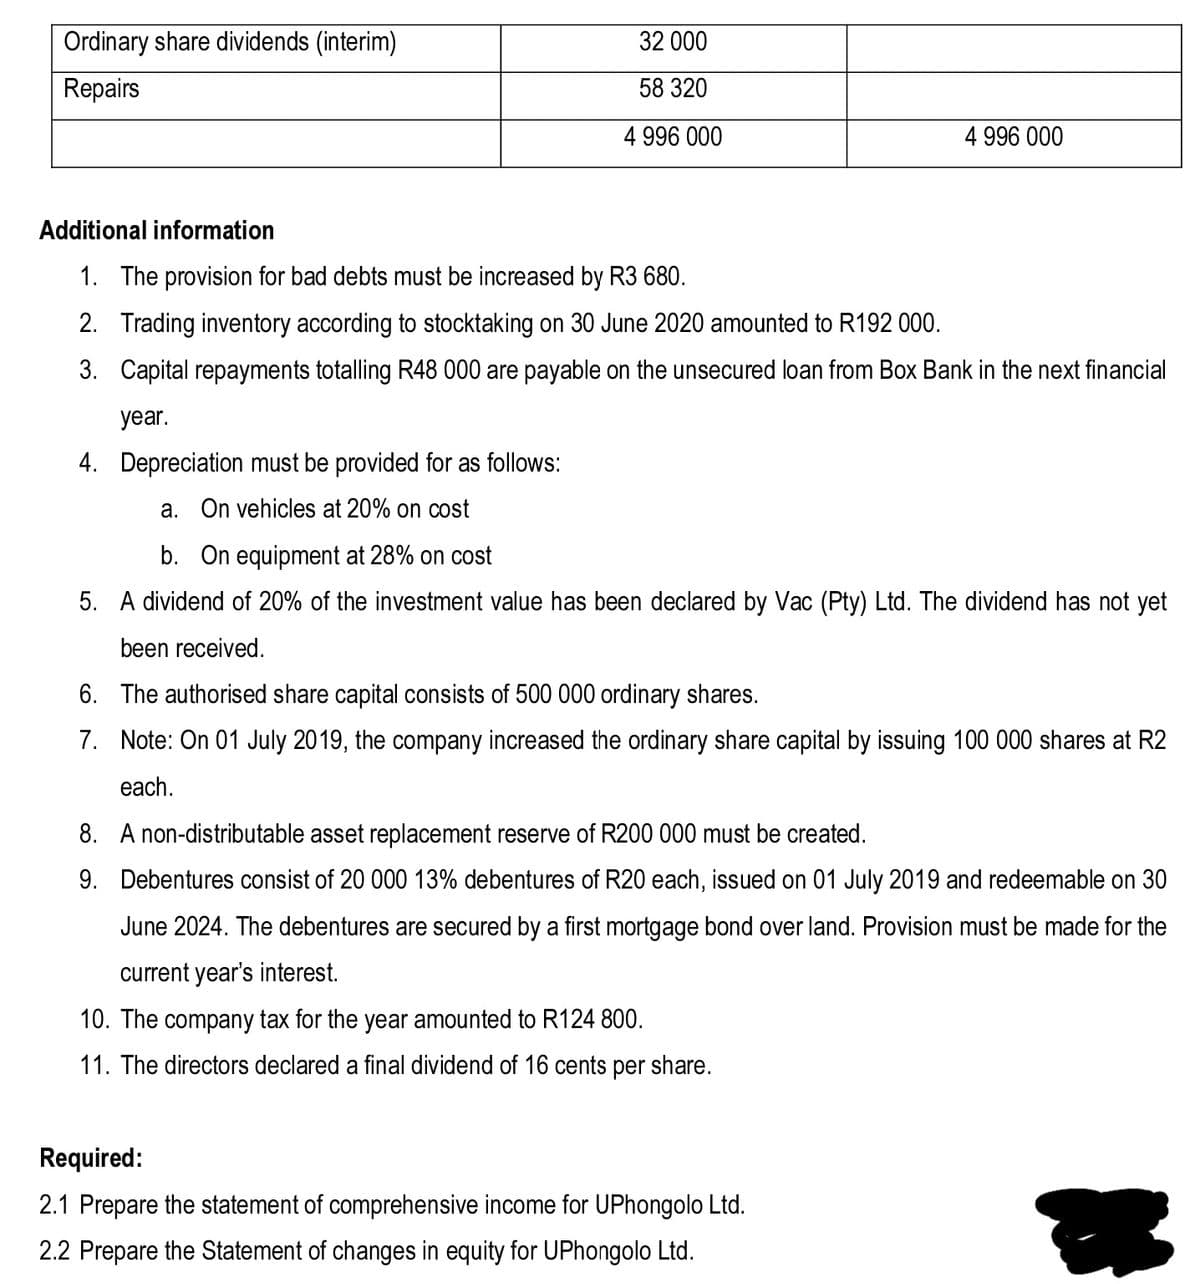 Ordinary share dividends (interim)
32 000
Repairs
58 320
4 996 000
4 996 000
Additional information
1. The provision for bad debts must be increased by R3 680.
2. Trading inventory according to stocktaking on 30 June 2020 amounted to R192 000.
3. Capital repayments totalling R48 000 are payable on the unsecured loan from Box Bank in the next financial
уear.
4. Depreciation must be provided for as follows:
a. On vehicles at 20% on cost
b. On equipment at 28% on cost
5. A dividend of 20% of the investment value has been declared by Vac (Pty) Ltd. The dividend has not yet
been received.
6. The authorised share capital consists of 500 000 ordinary shares.
7. Note: On 01 July 2019, the company increased the ordinary share capital by issuing 100 000 shares at R2
each.
8. A non-distributable asset replacement reserve of R200 000 must be created.
9. Debentures consist of 20 000 13% debentures of R20 each, issued on 01 July 2019 and redeemable on 30
June 2024. The debentures are secured by a first mortgage bond over land. Provision must be made for the
current year's interest.
10. The company tax for the year amounted to R124 800.
11. The directors declared a final dividend of 16 cents per share.
Required:
2.1 Prepare the statement of comprehensive income for UPhongolo Ltd.
2.2 Prepare the Statement of changes in equity for UPhongolo Ltd.
